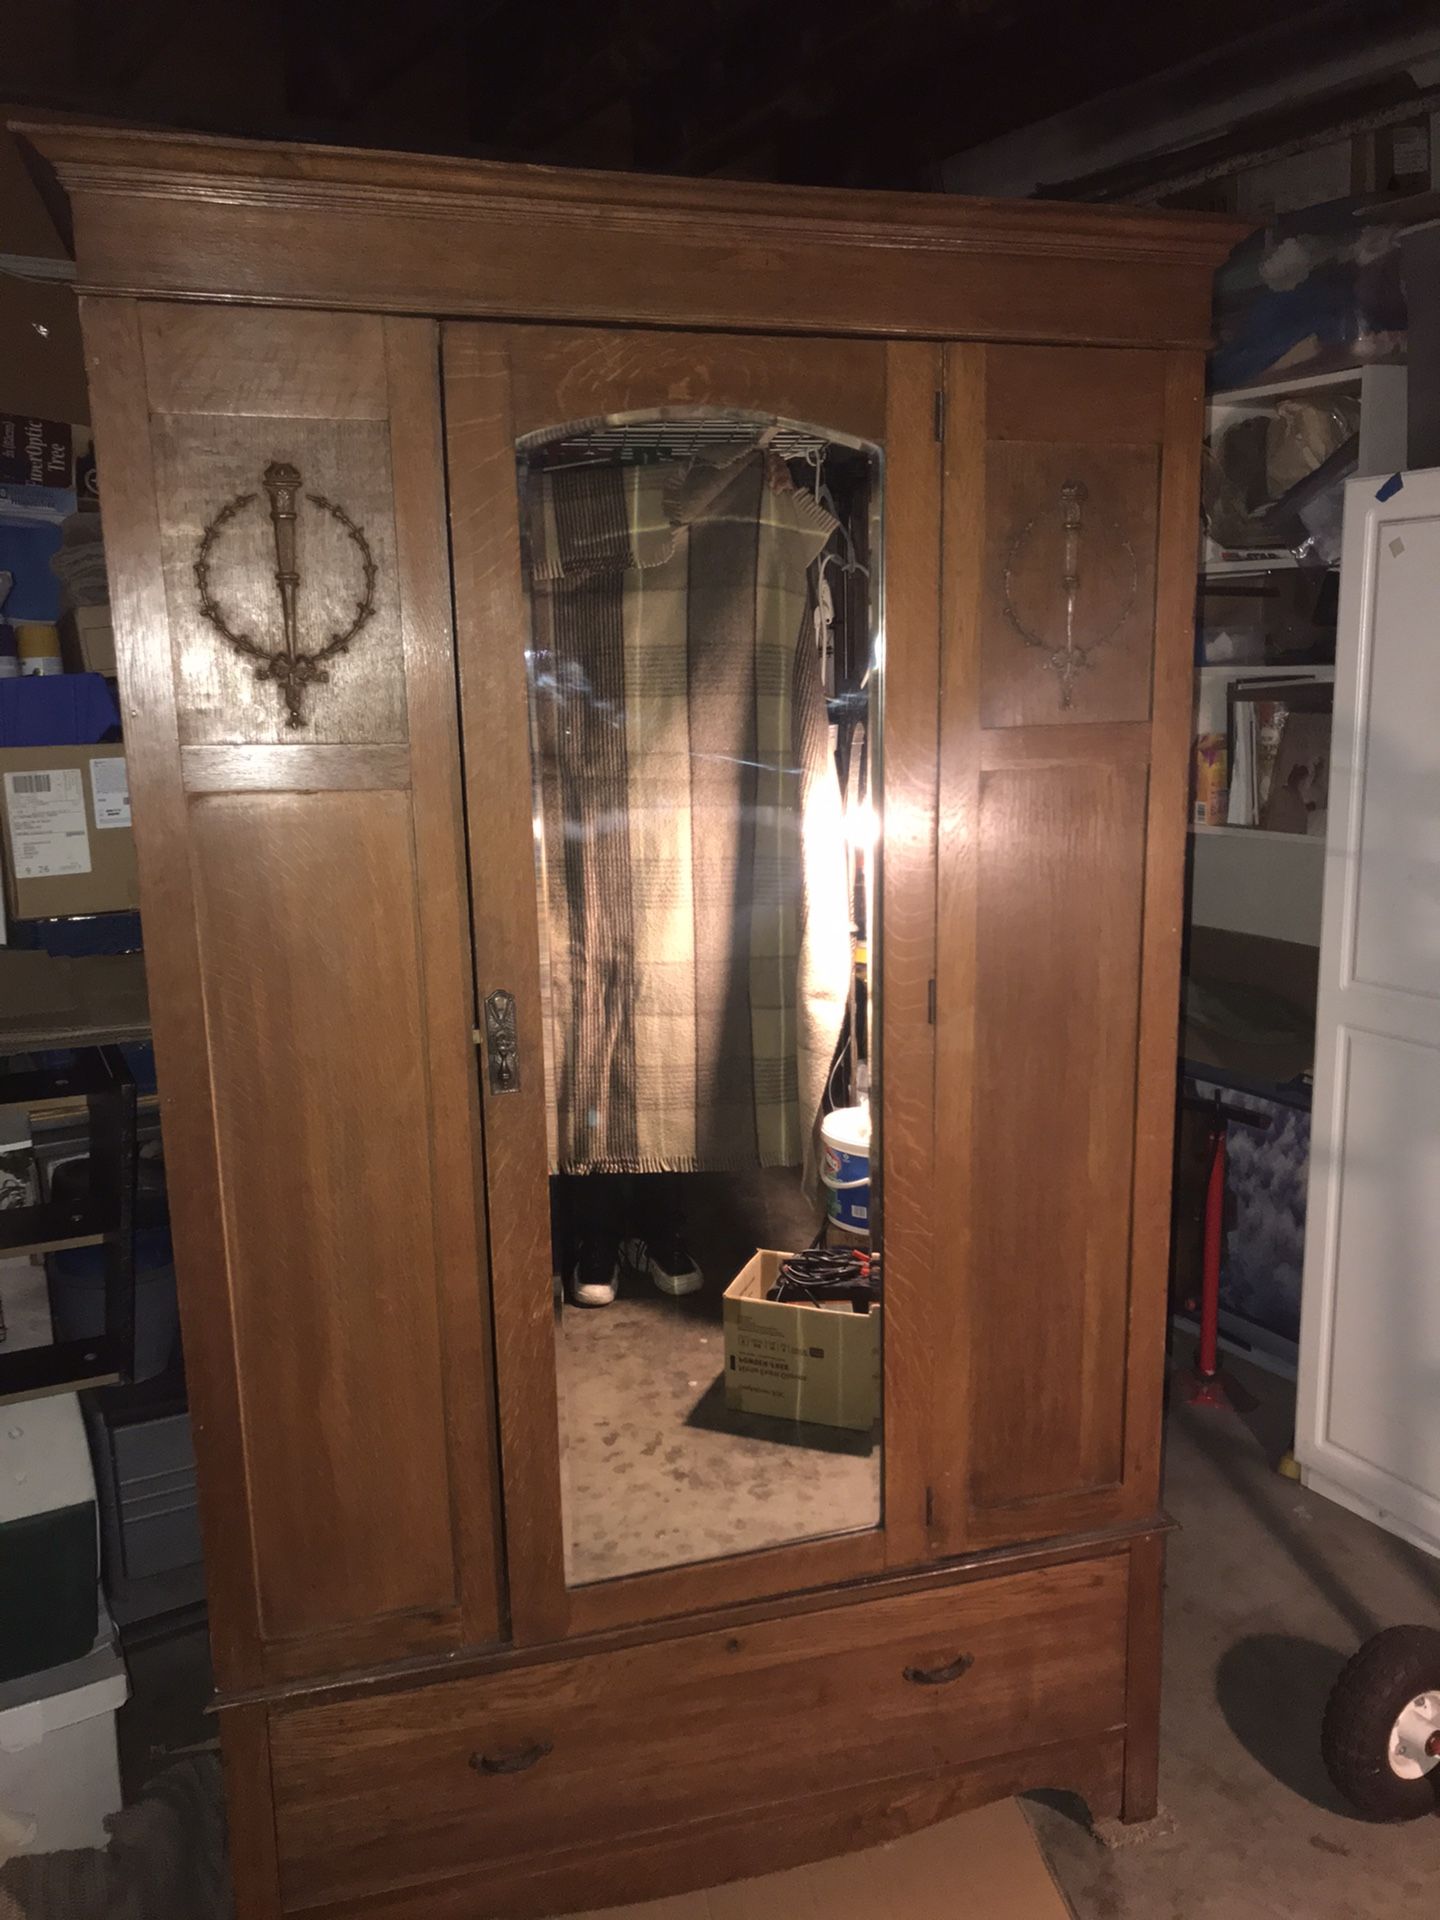 Antique armoire with beveled mirror. Approximately 78 inches tall by 48 inches wide and 24 inches deep. This comes apart into 3 separate pieces which